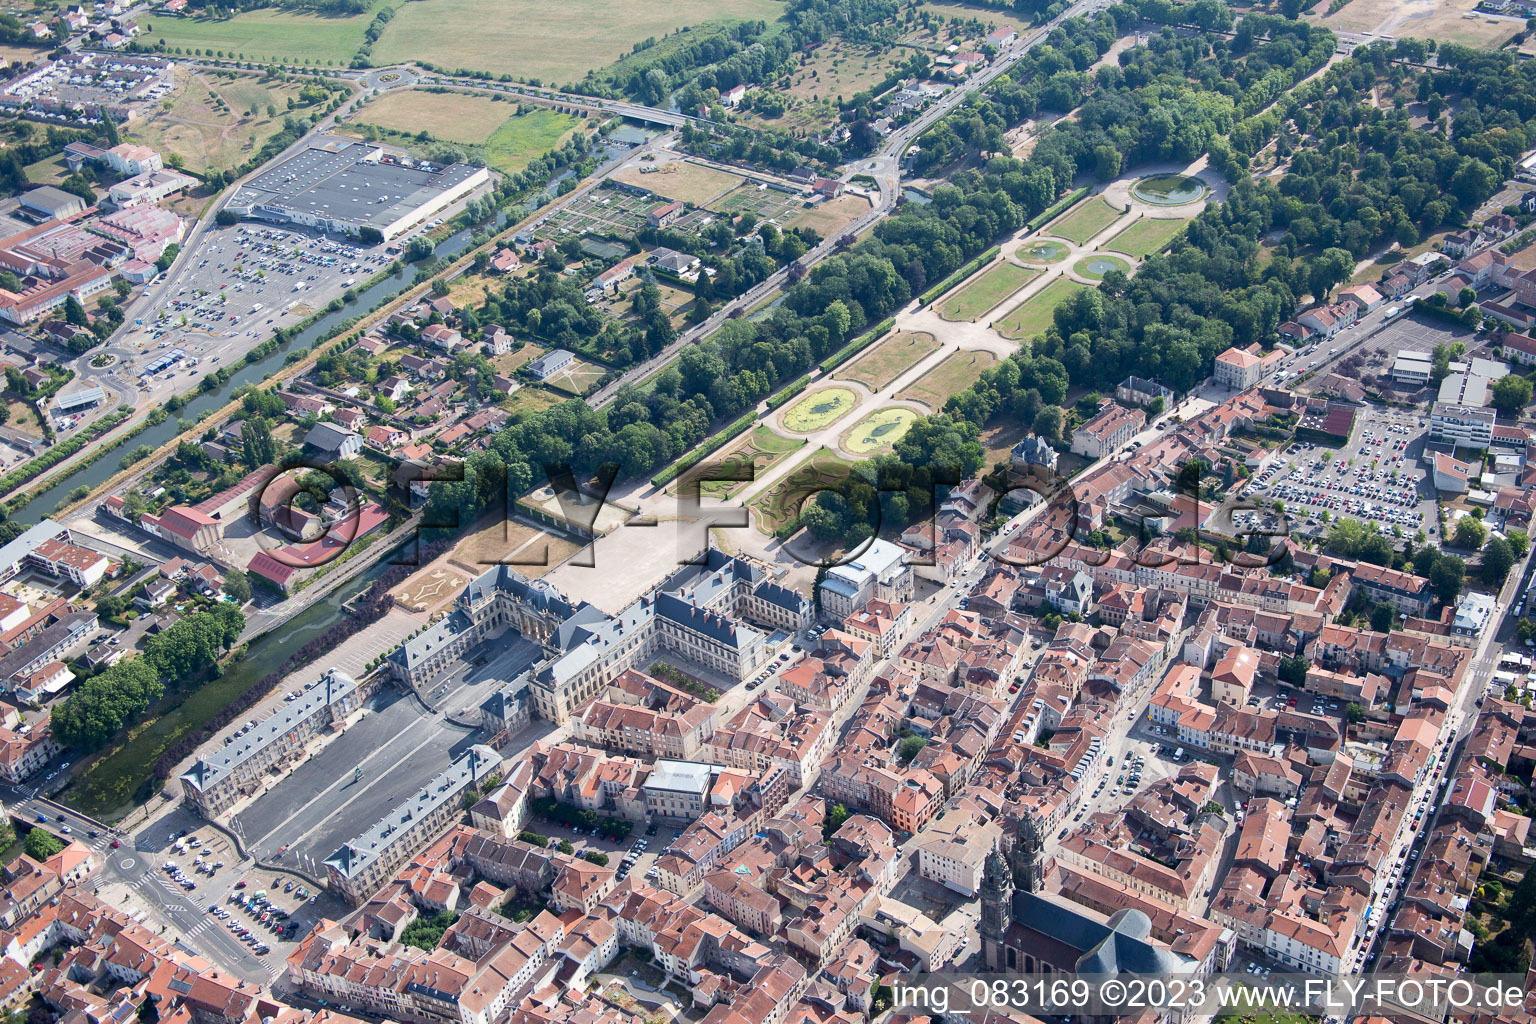 Aerial photograpy of Lunéville in the state Meurthe et Moselle, France